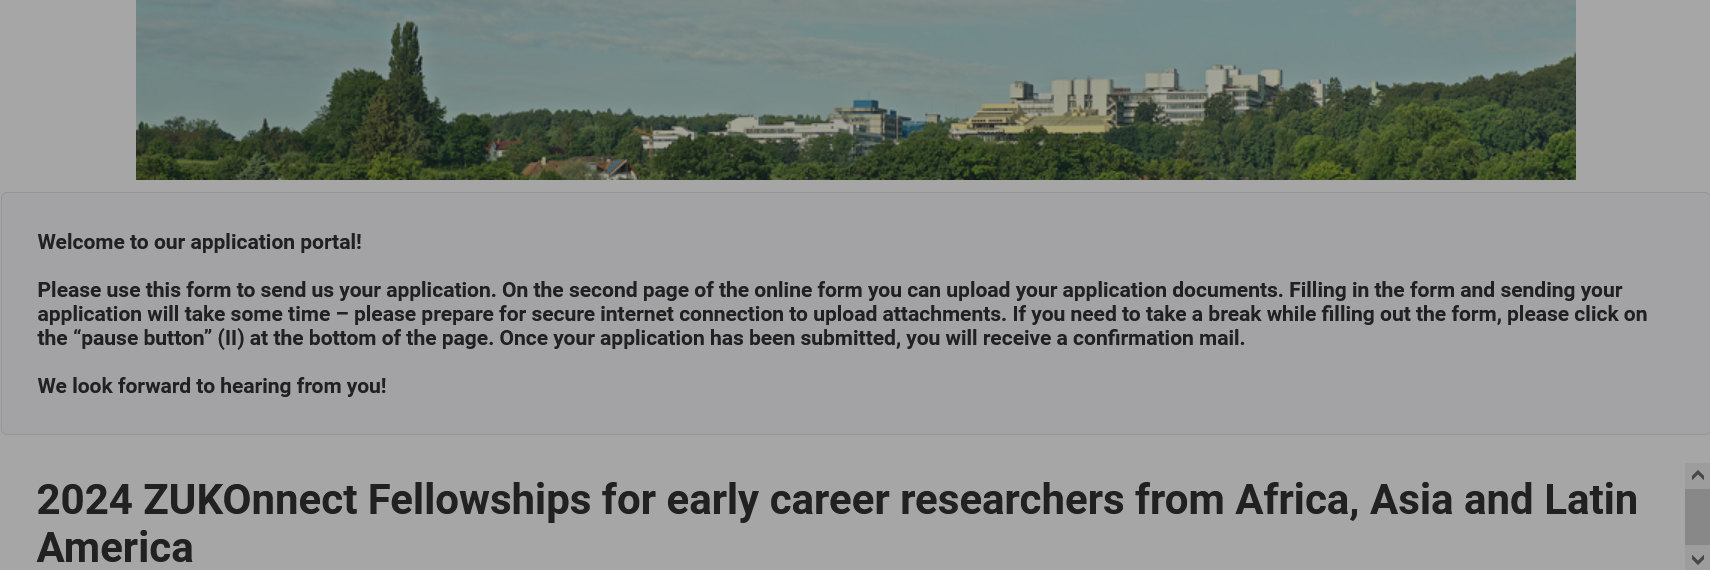 University Of Konstanz ZUKOnnect Fellowships for Early-Career Researchers 2024